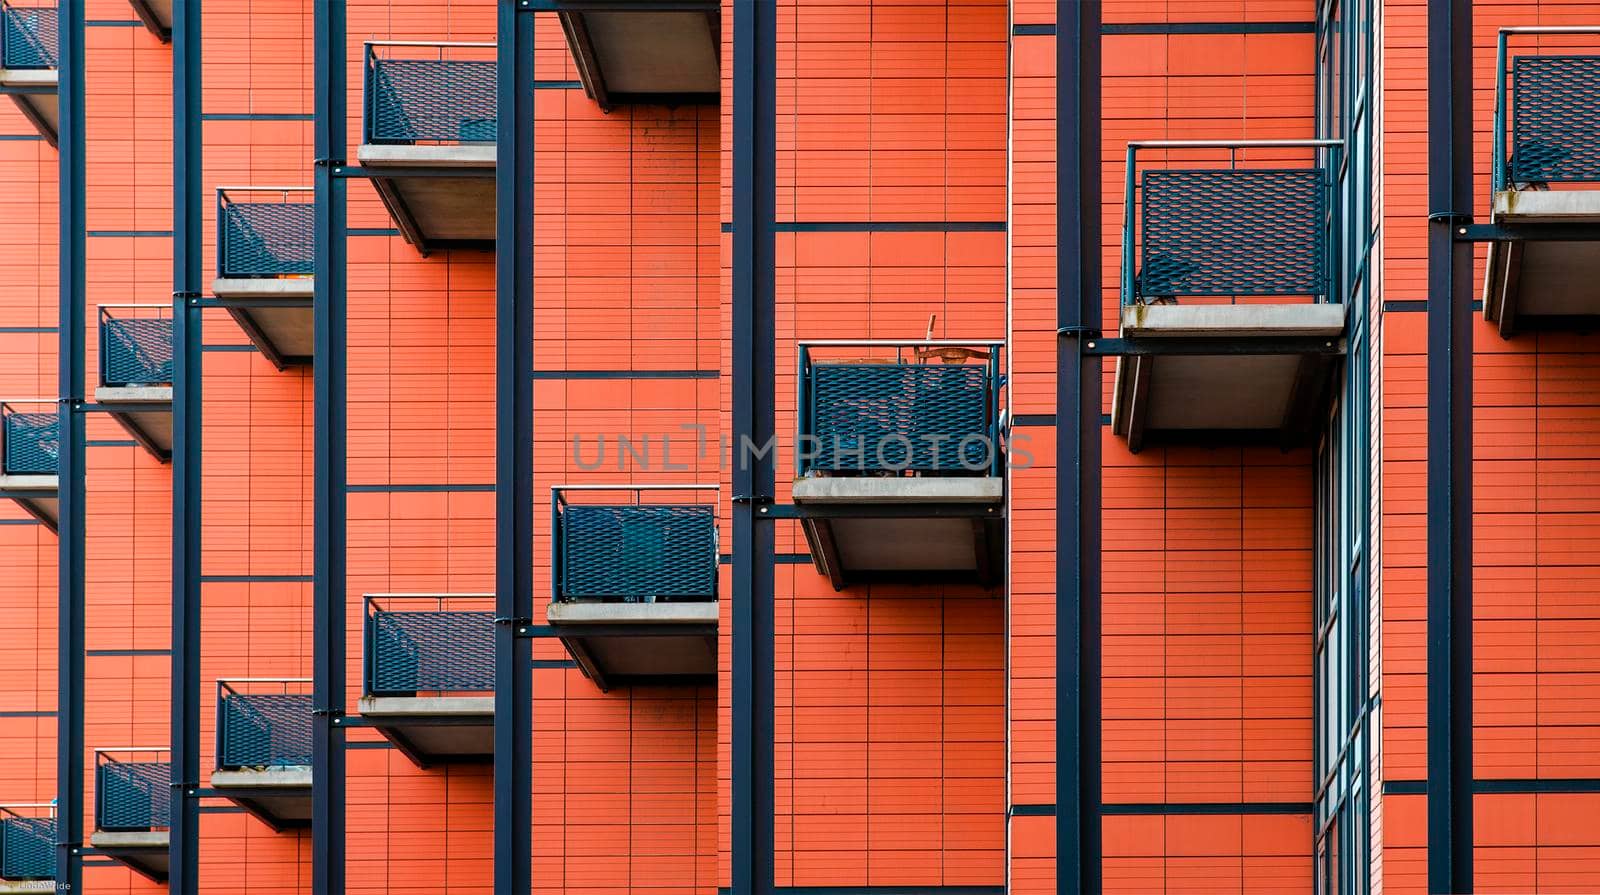 Building with many balconies, Pattern of the facade of a building, Balconies. Geometry minimalist art red